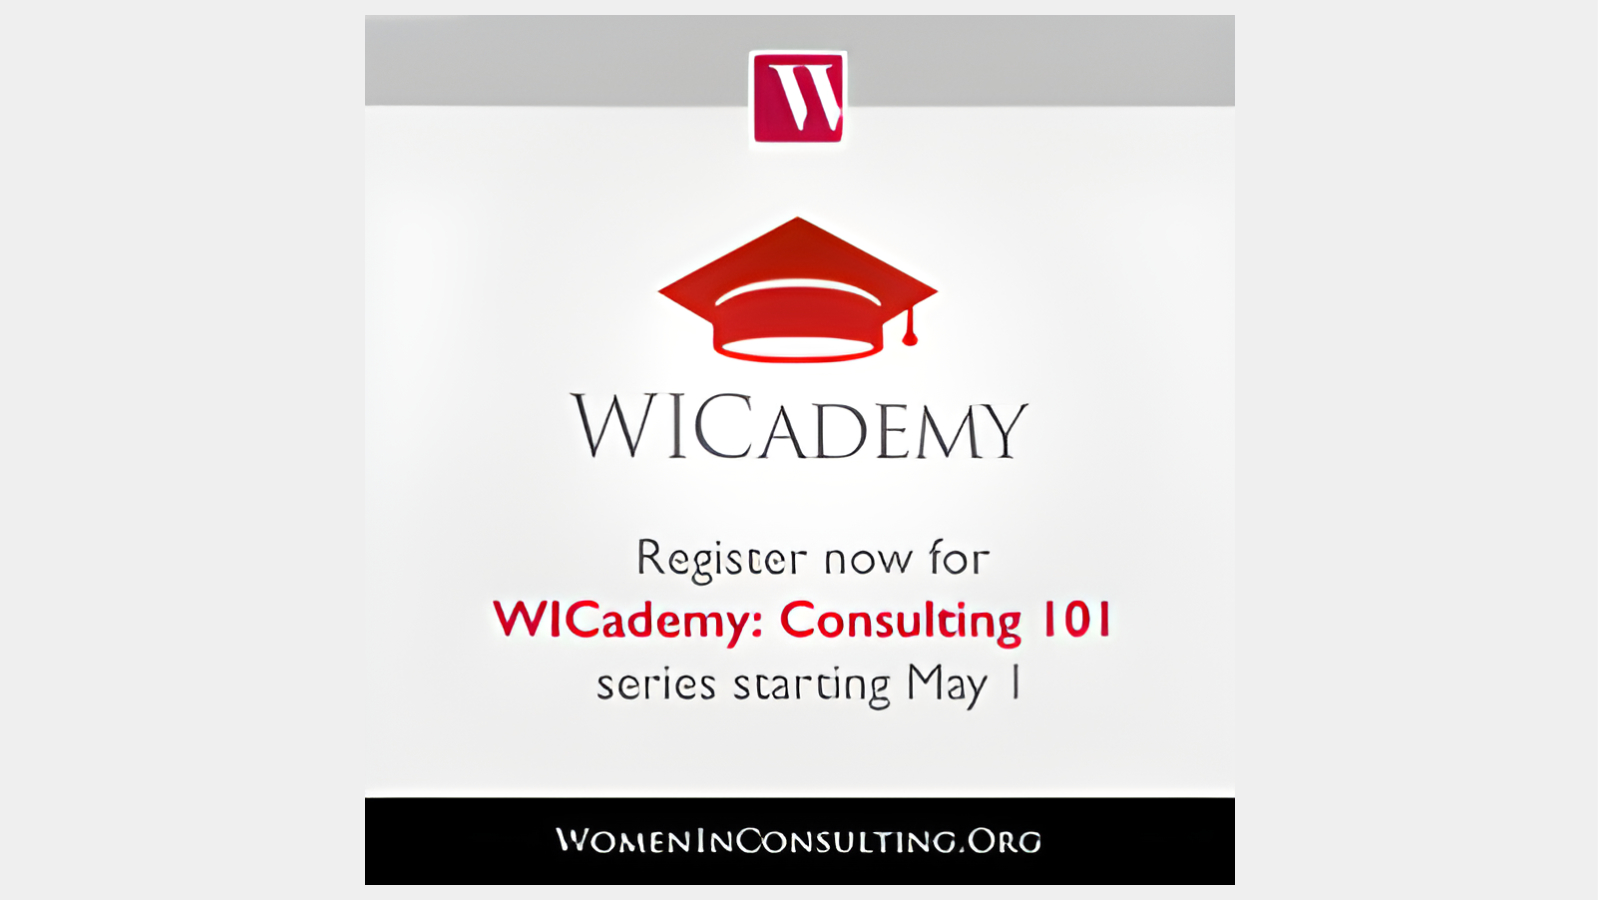 WICademy course on Consulting